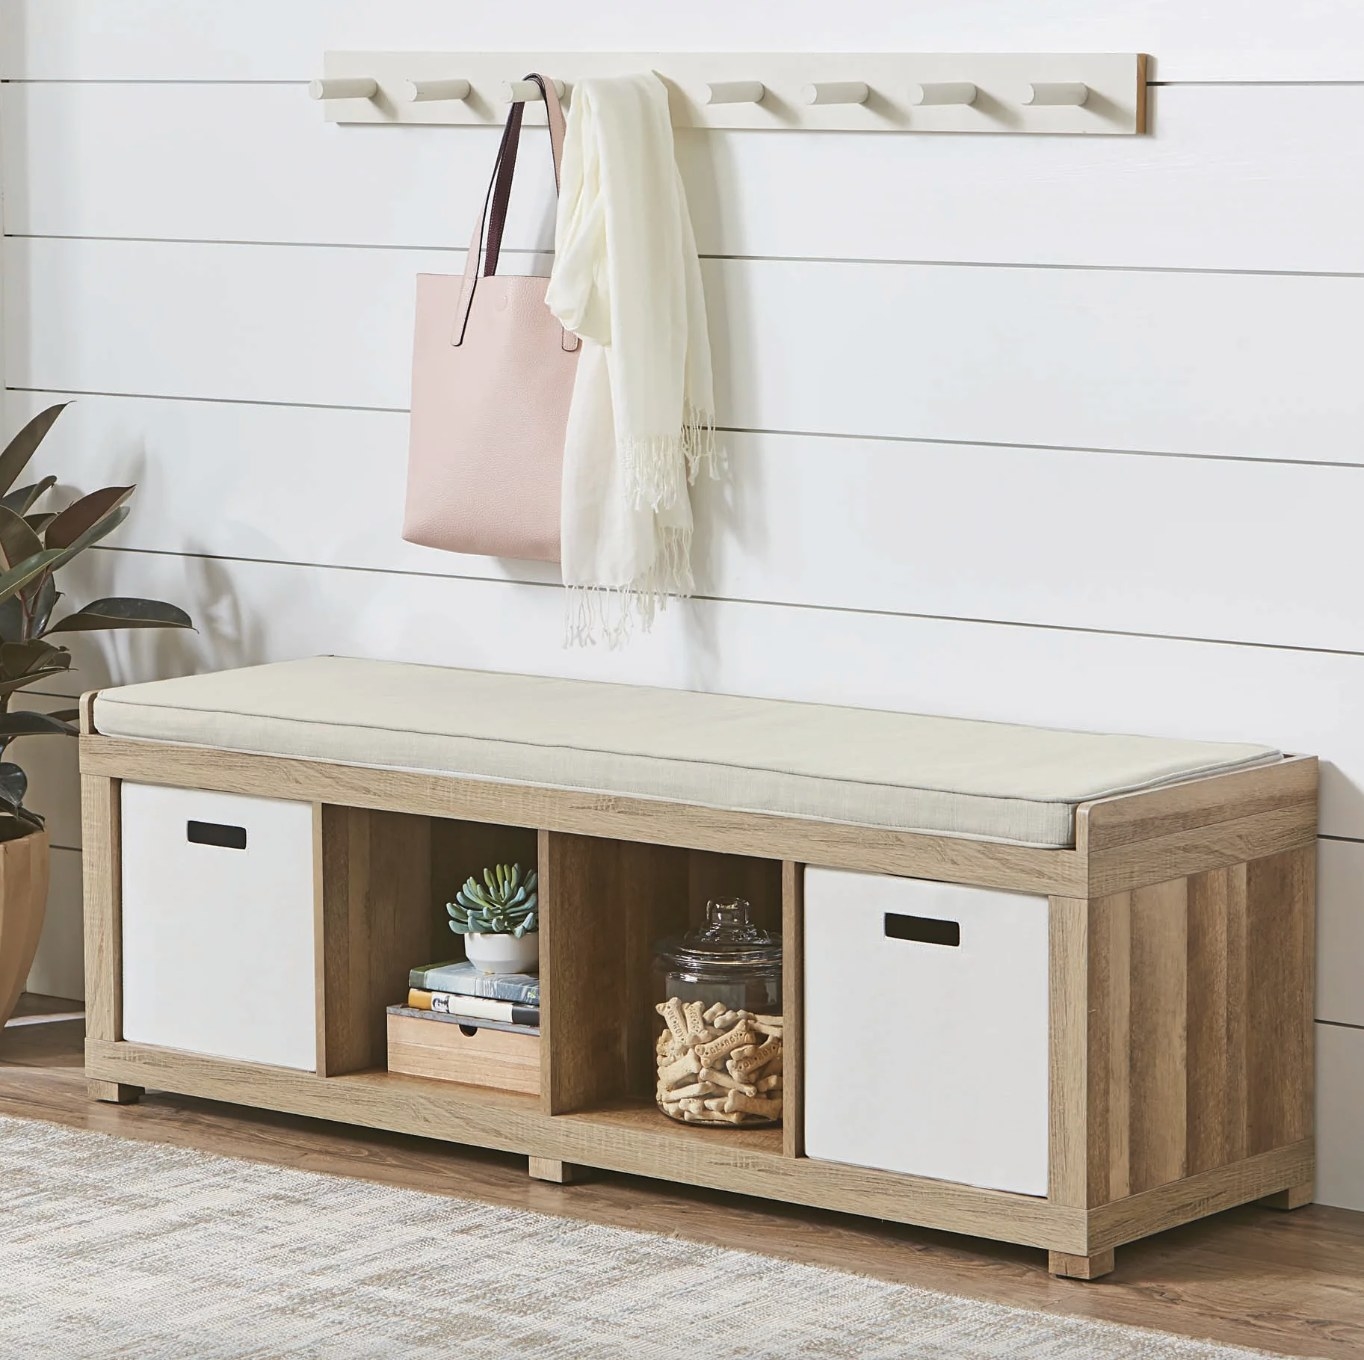 the light wood bench with two bins and decorations in a styled entryway space